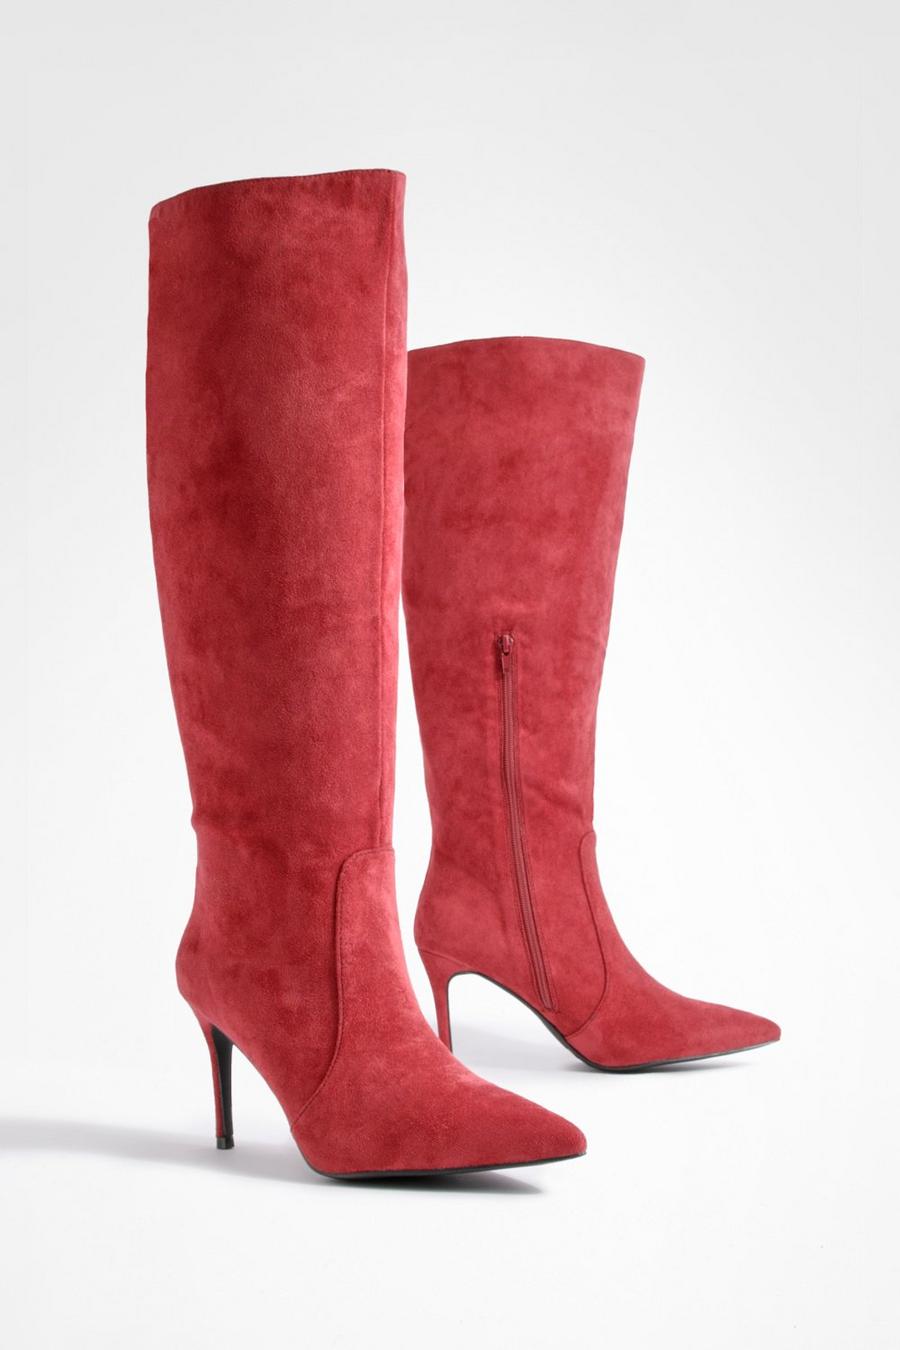 Red Stiletto Pointed Toe Knee High Boots     